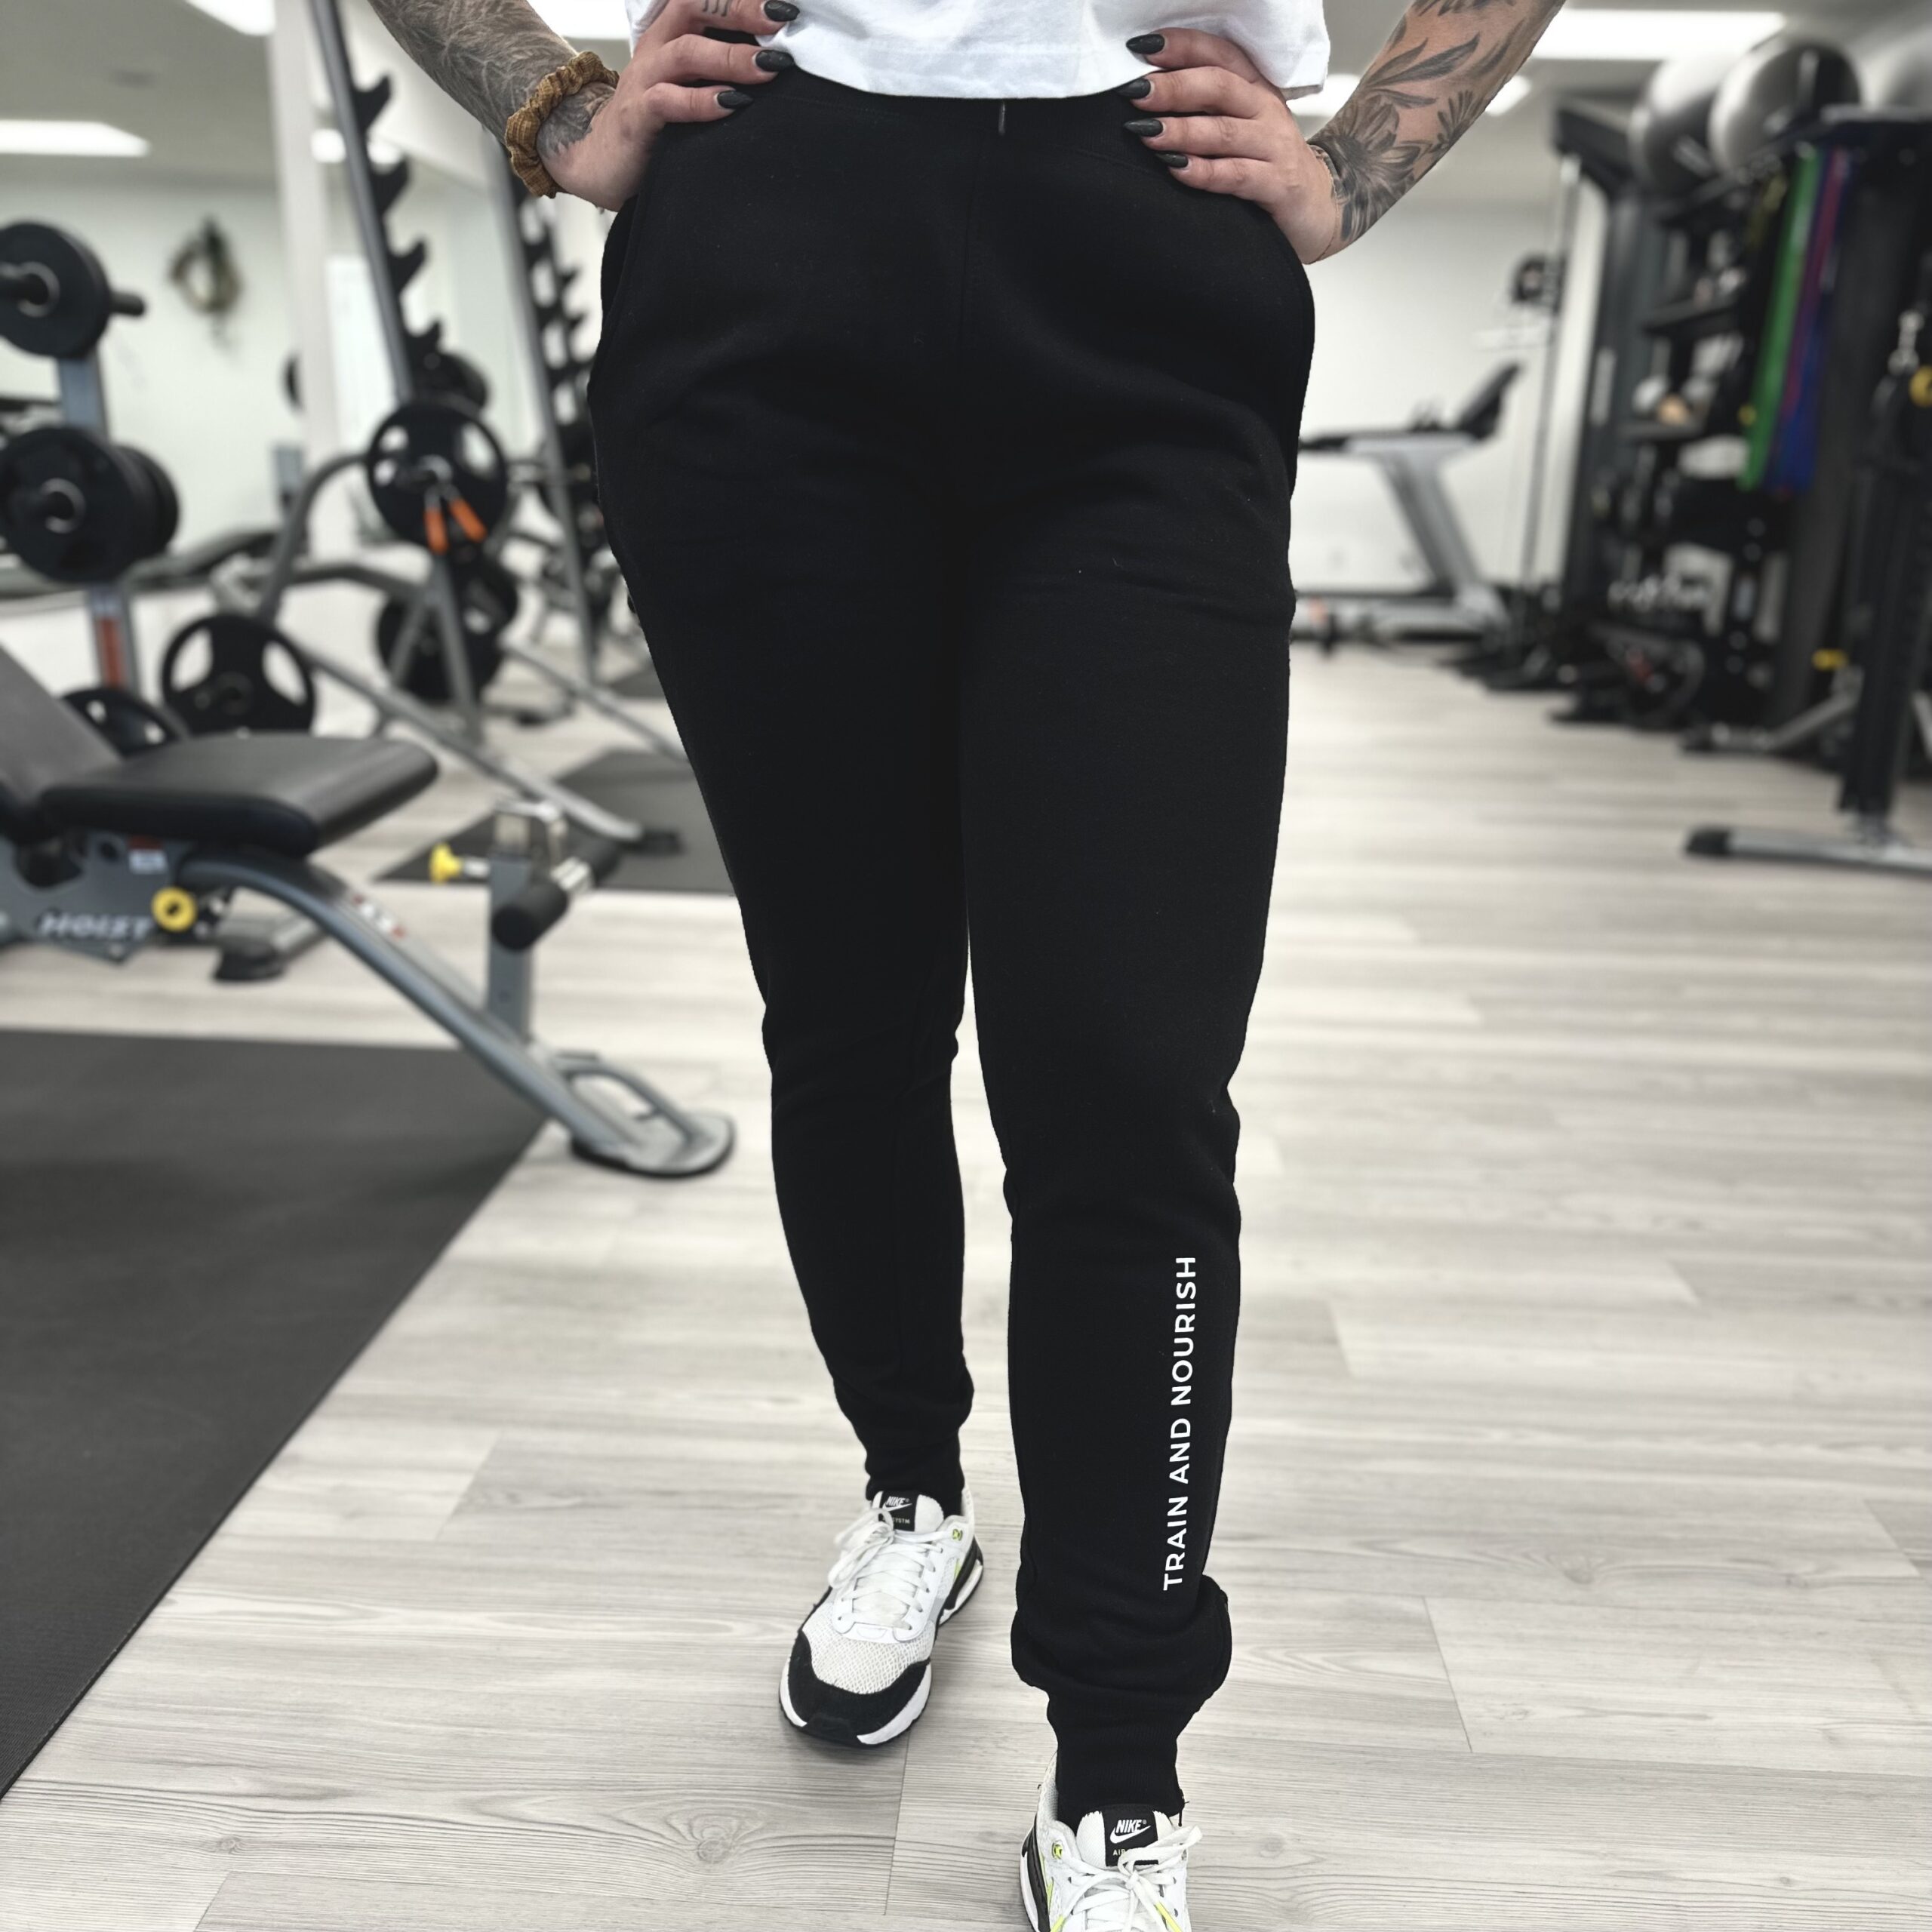 A woman showcasing merchandise in a gym wearing black joggers.